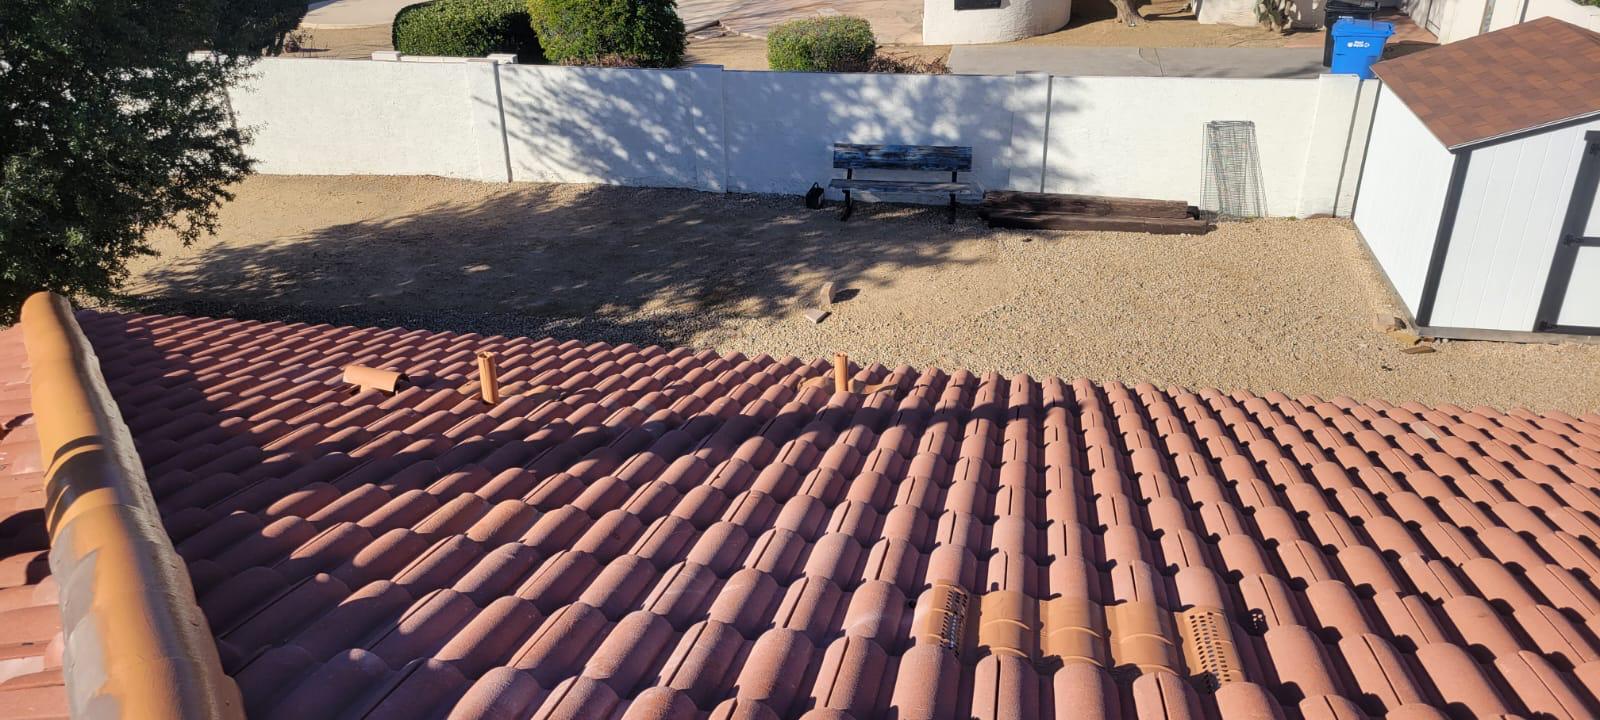 Close-up of high-quality roofing tiles used in McCormick Ranch projects.